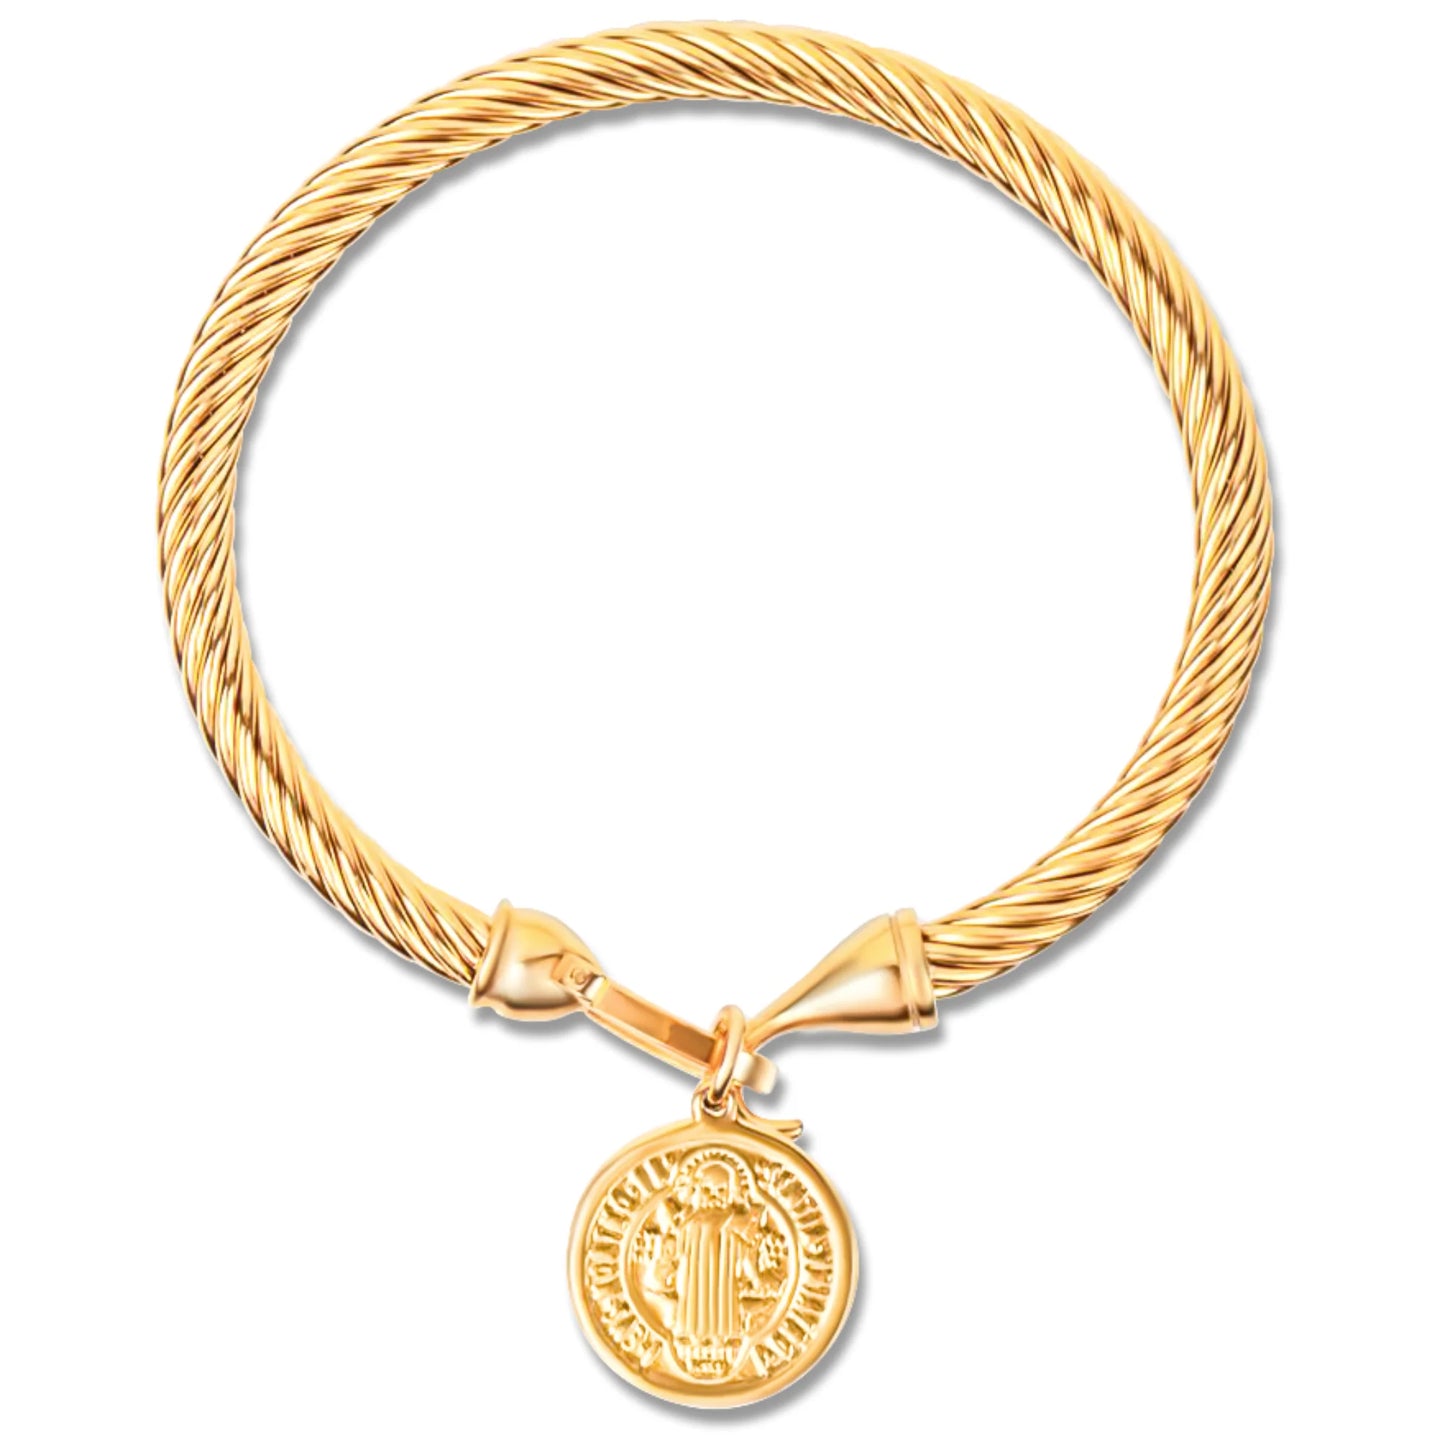 thick snake chain bracelet with coin pendant